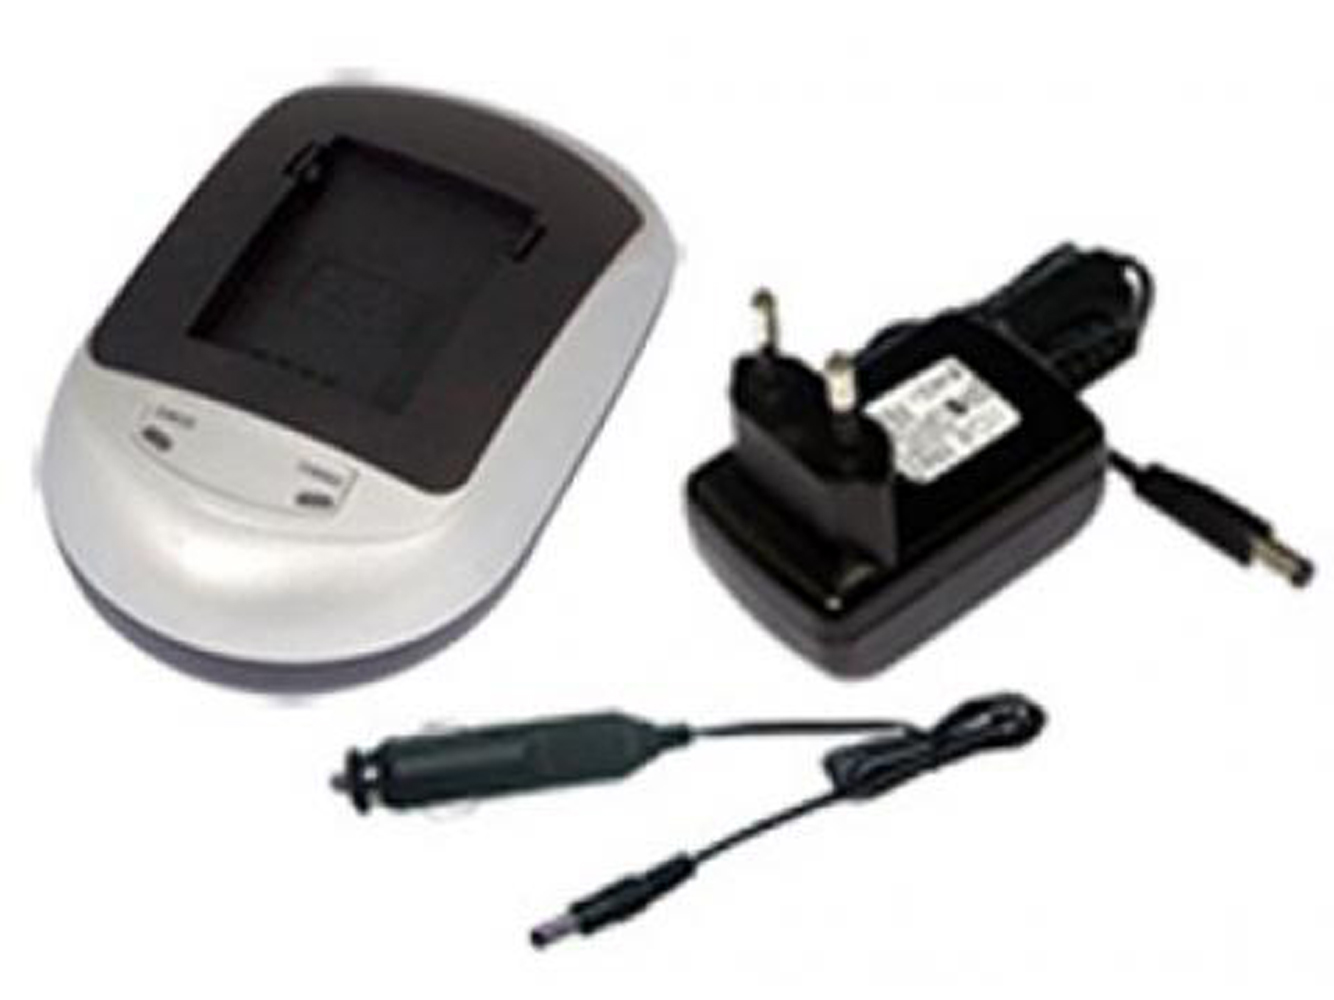 Panasonic Bp-dc9, Bp-dc9e Battery Chargers For Leica V-lux2, Leica V-lux3 replacement